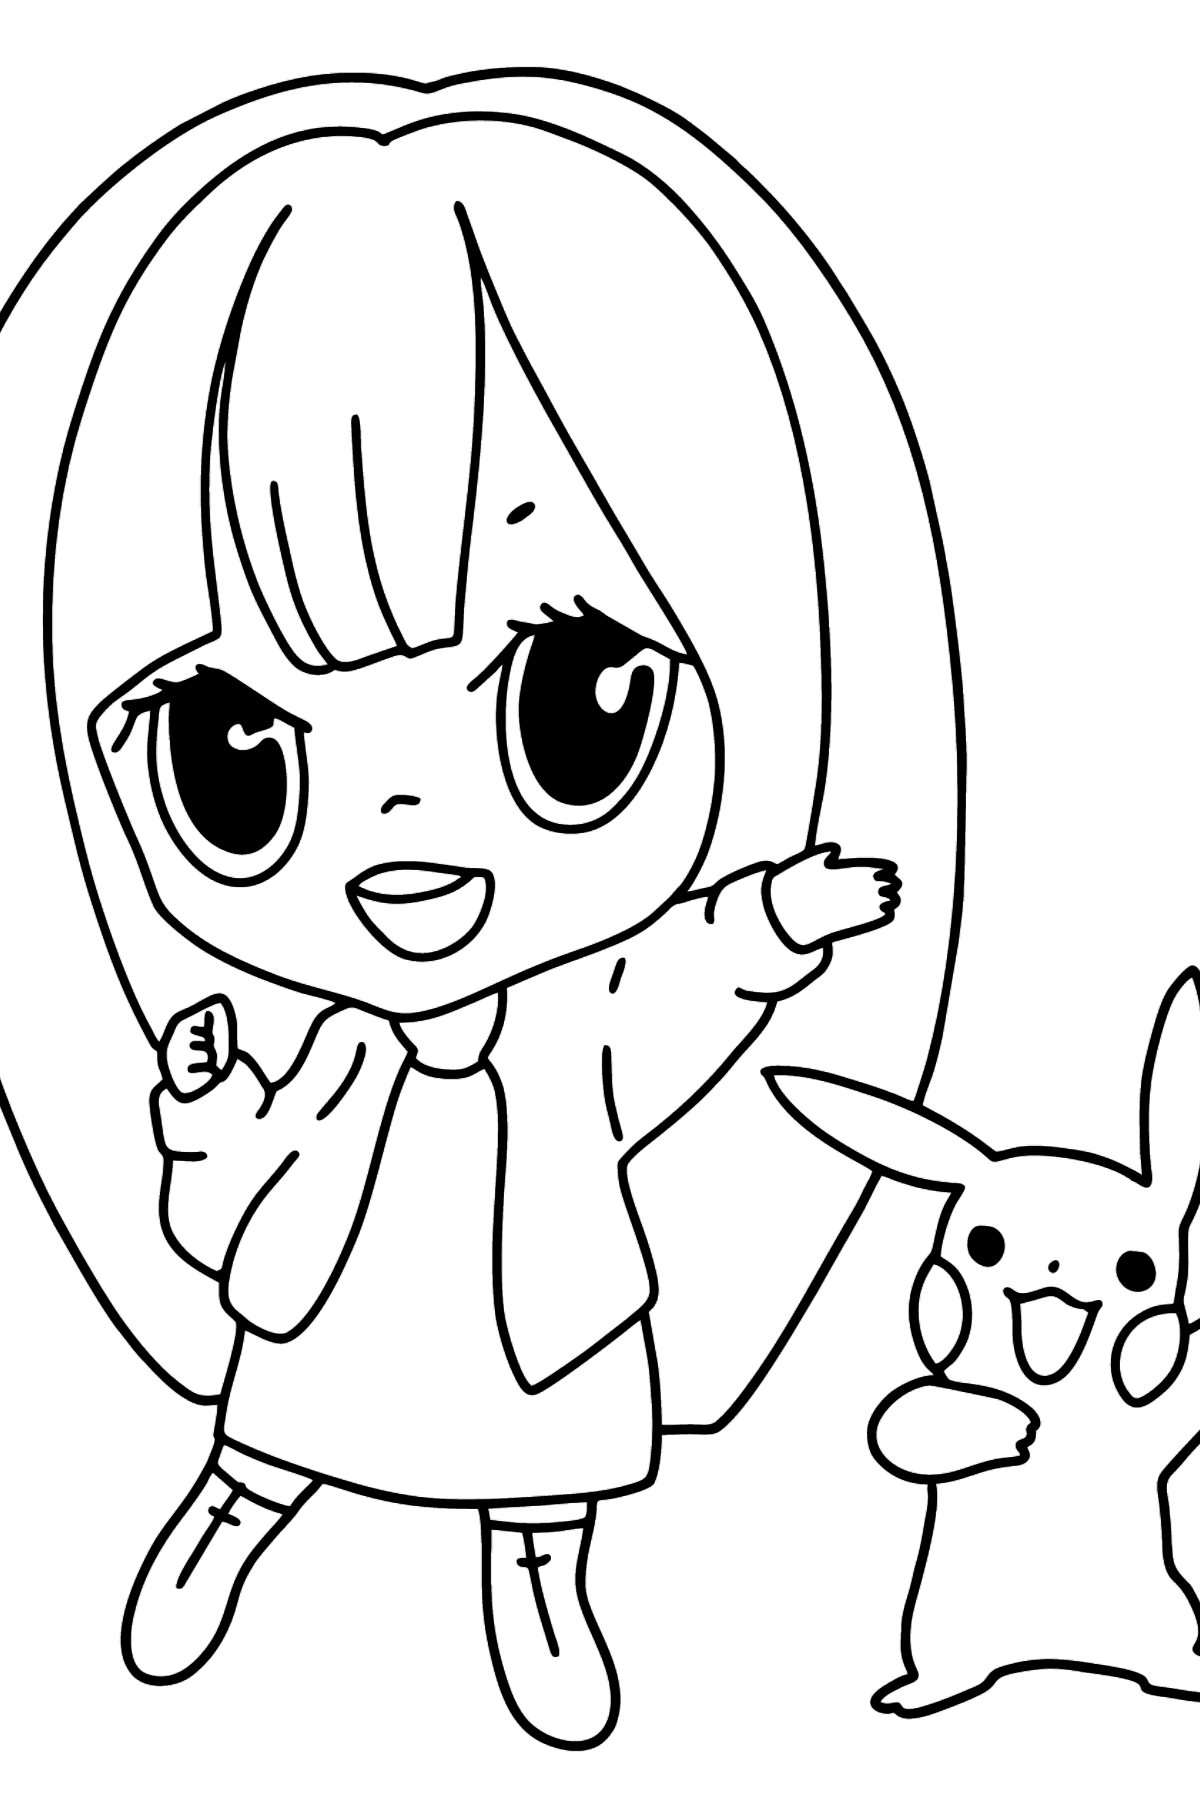 Anime Girl Kawaii Coloring Pages ♥ Online and Print for Free!